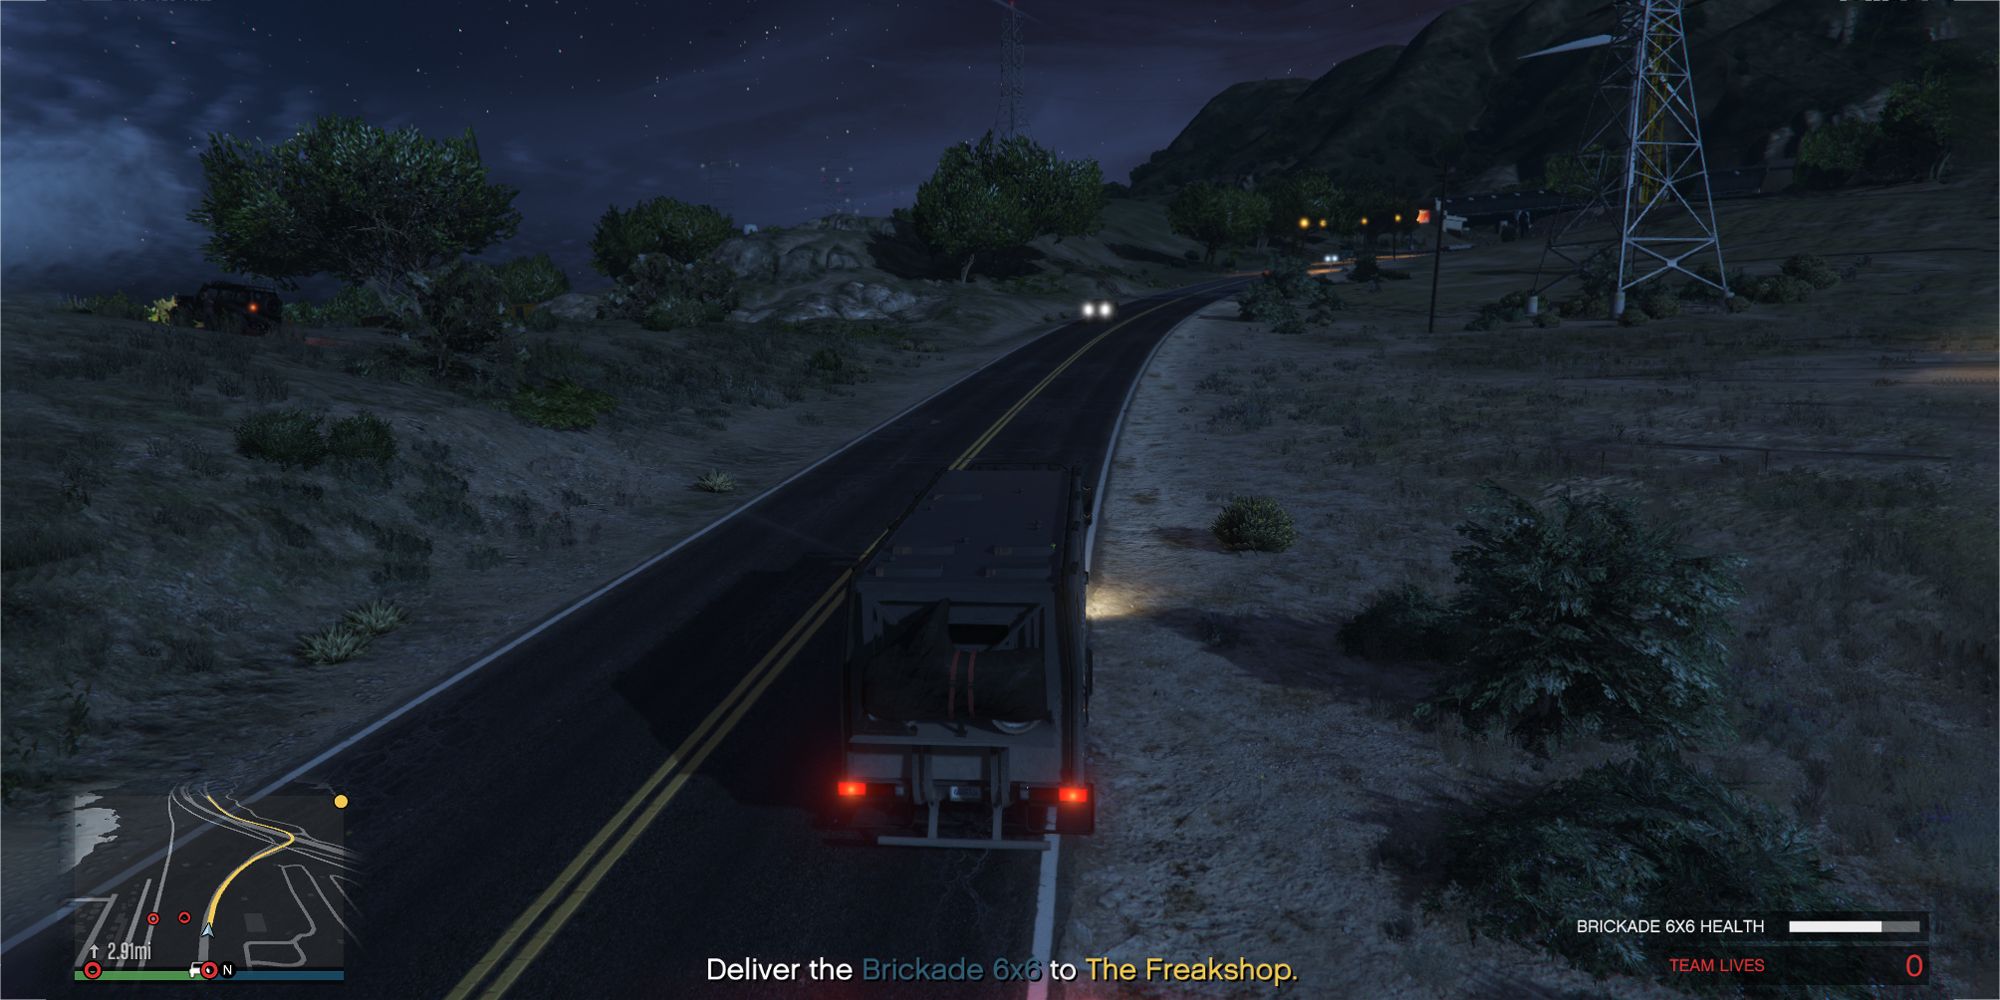 The image shows a Grand Theft Auto Online player delivering a 6x6 Brickade truck on the main road, surrounded by enemies.  The text in the bottom center reads 